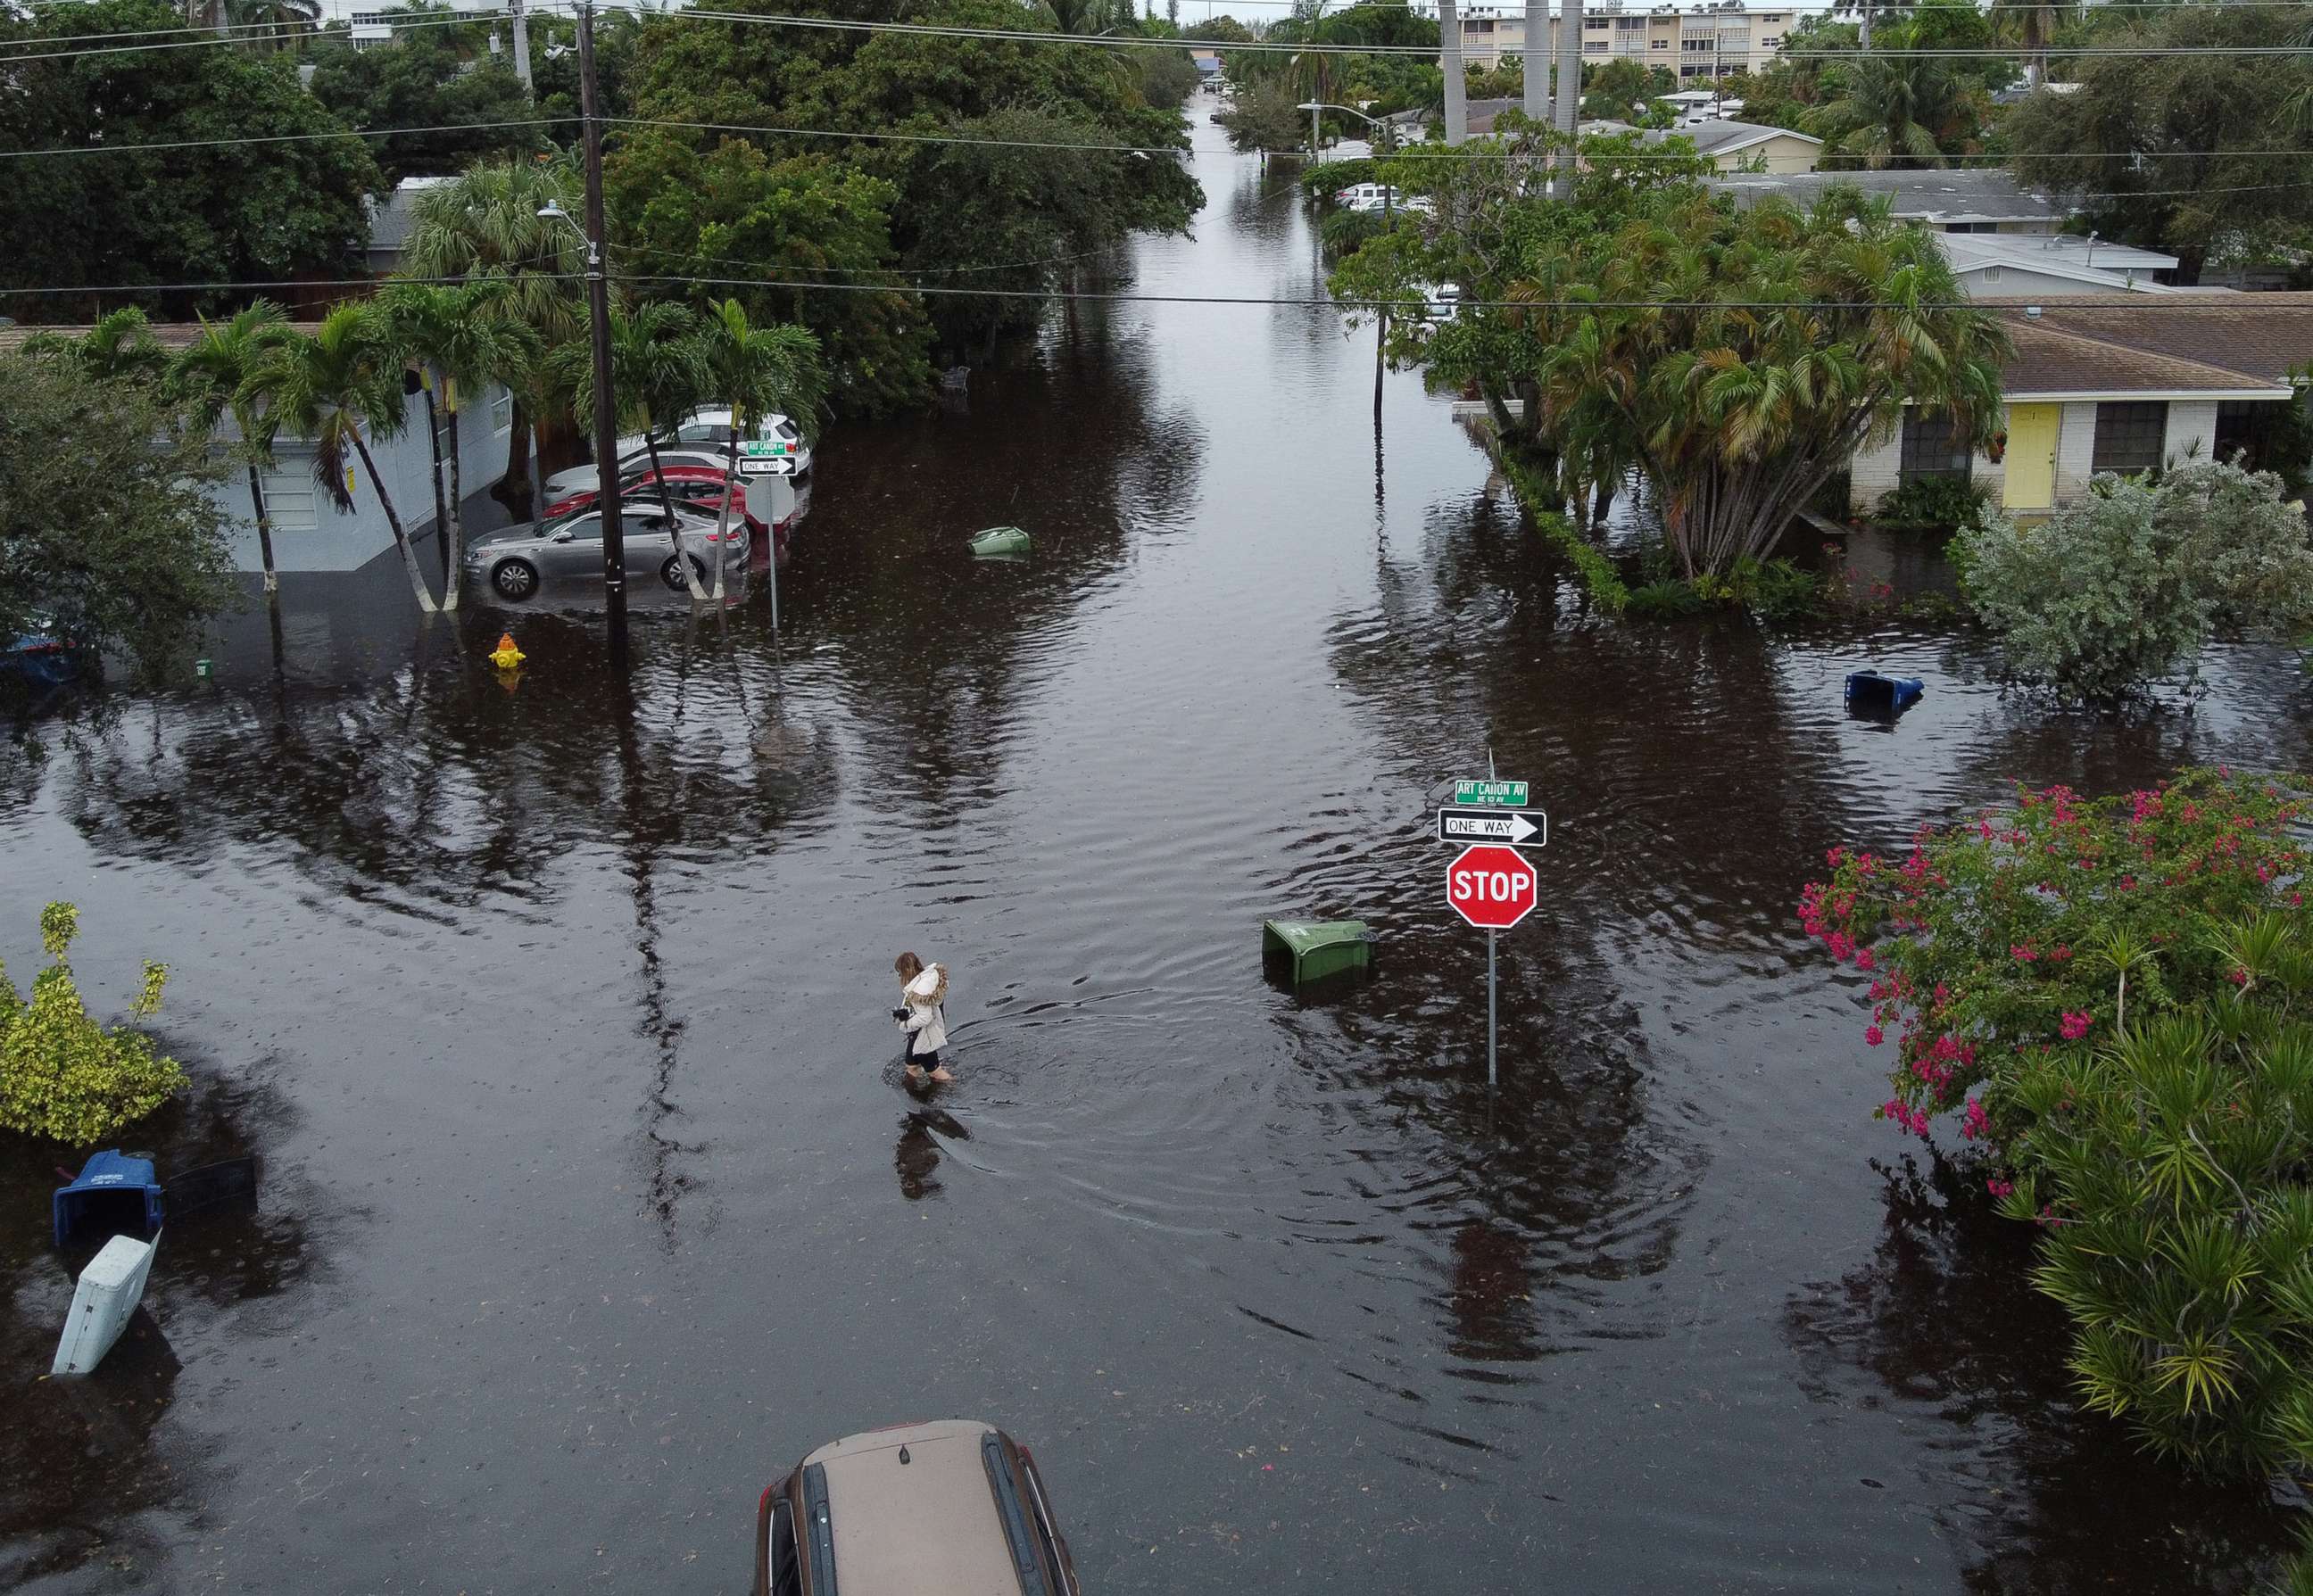 PHOTO: HALLANDALE, FLORIDA - DECEMBER 23: An aerial view from a drone shows a woman crossing a street inundated with flood water on December 23, 2019 in Hallandale, Florida. 